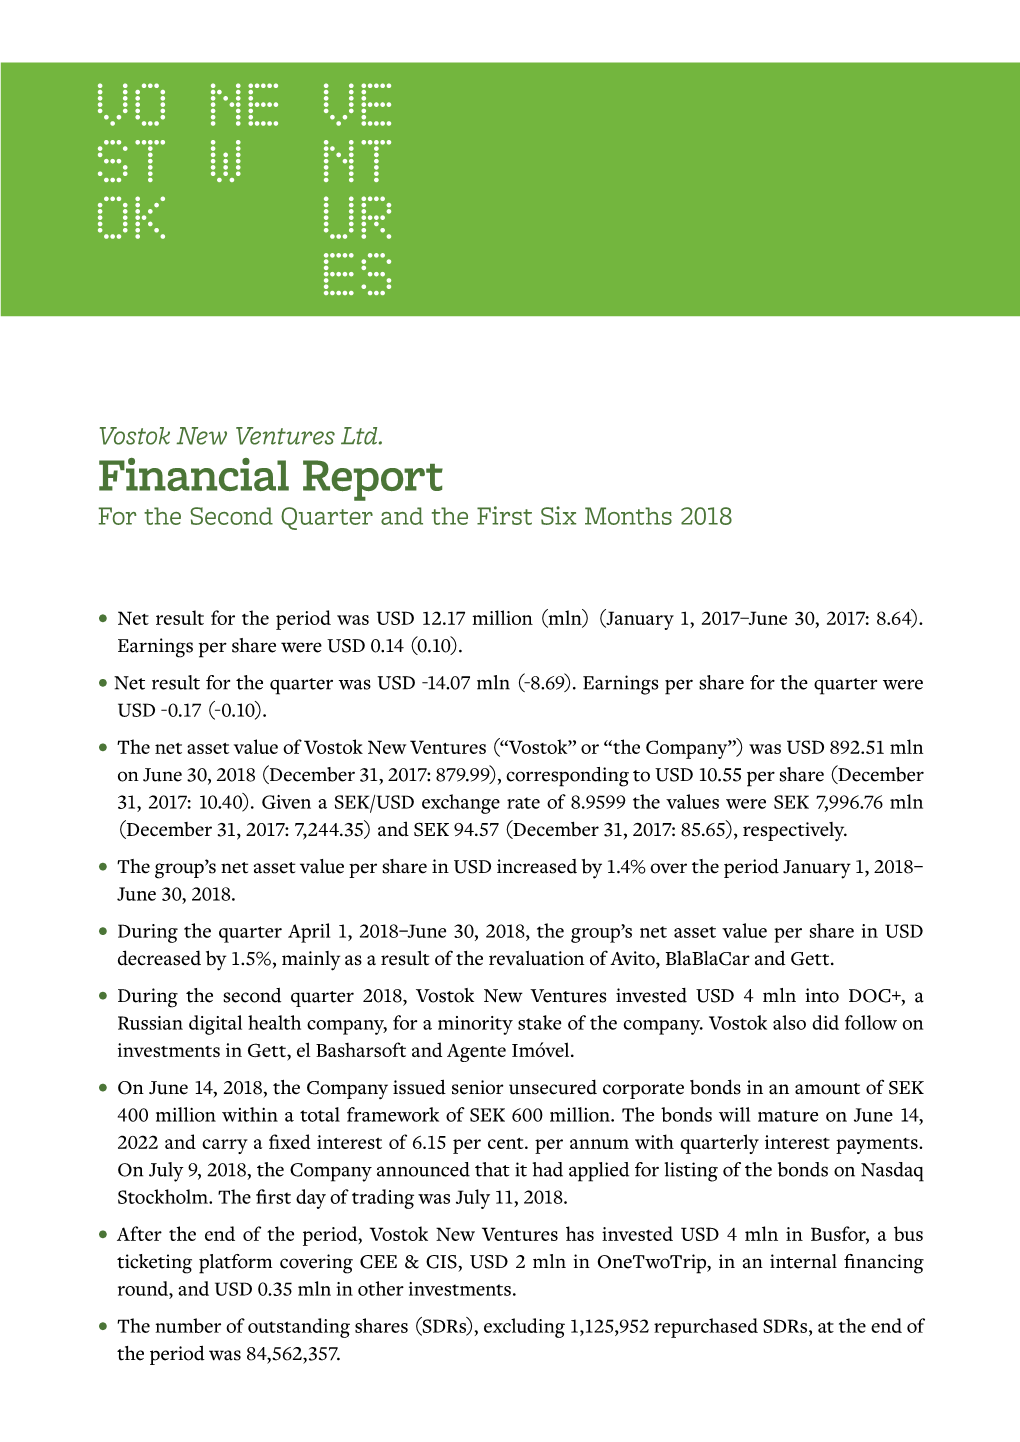 Financial Report for the Second Quarter and the First Six Months 2018